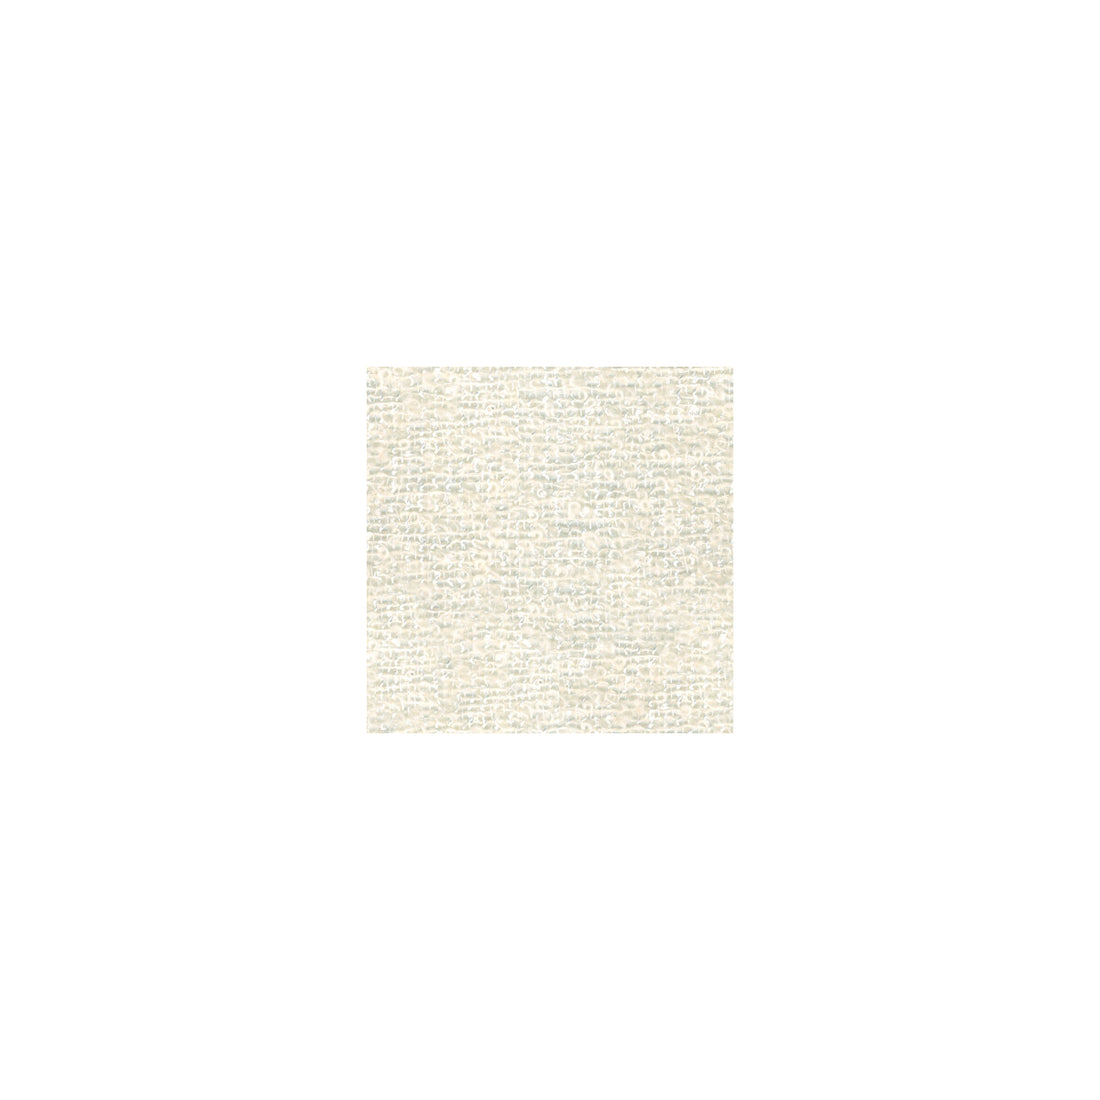 Airy fabric in wool color - pattern 9537.1.0 - by Kravet Couture in the Calvin Klein Collection collection